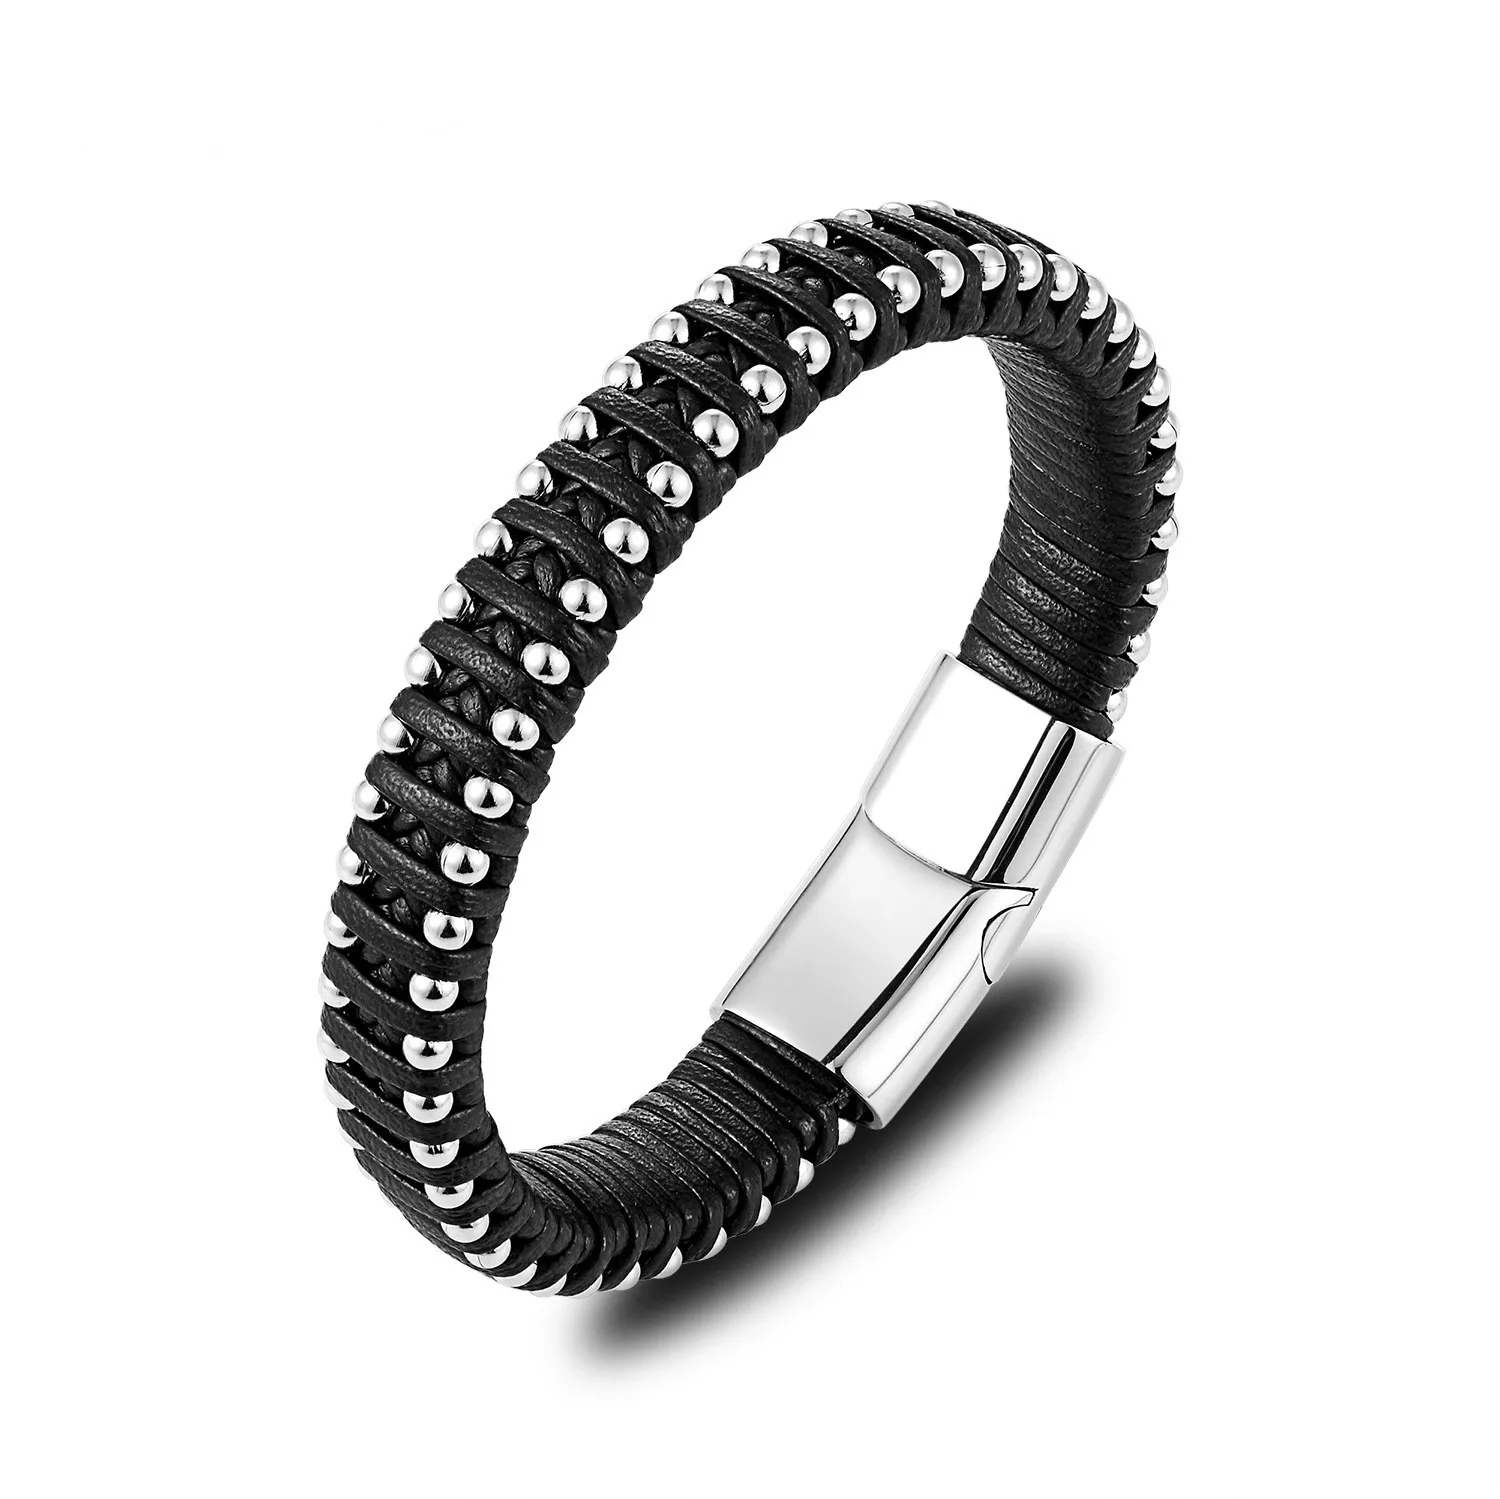 Men's Stainless Steel Black Silicone Inlaid Braided Leather Bracelet Bangle Cuff 